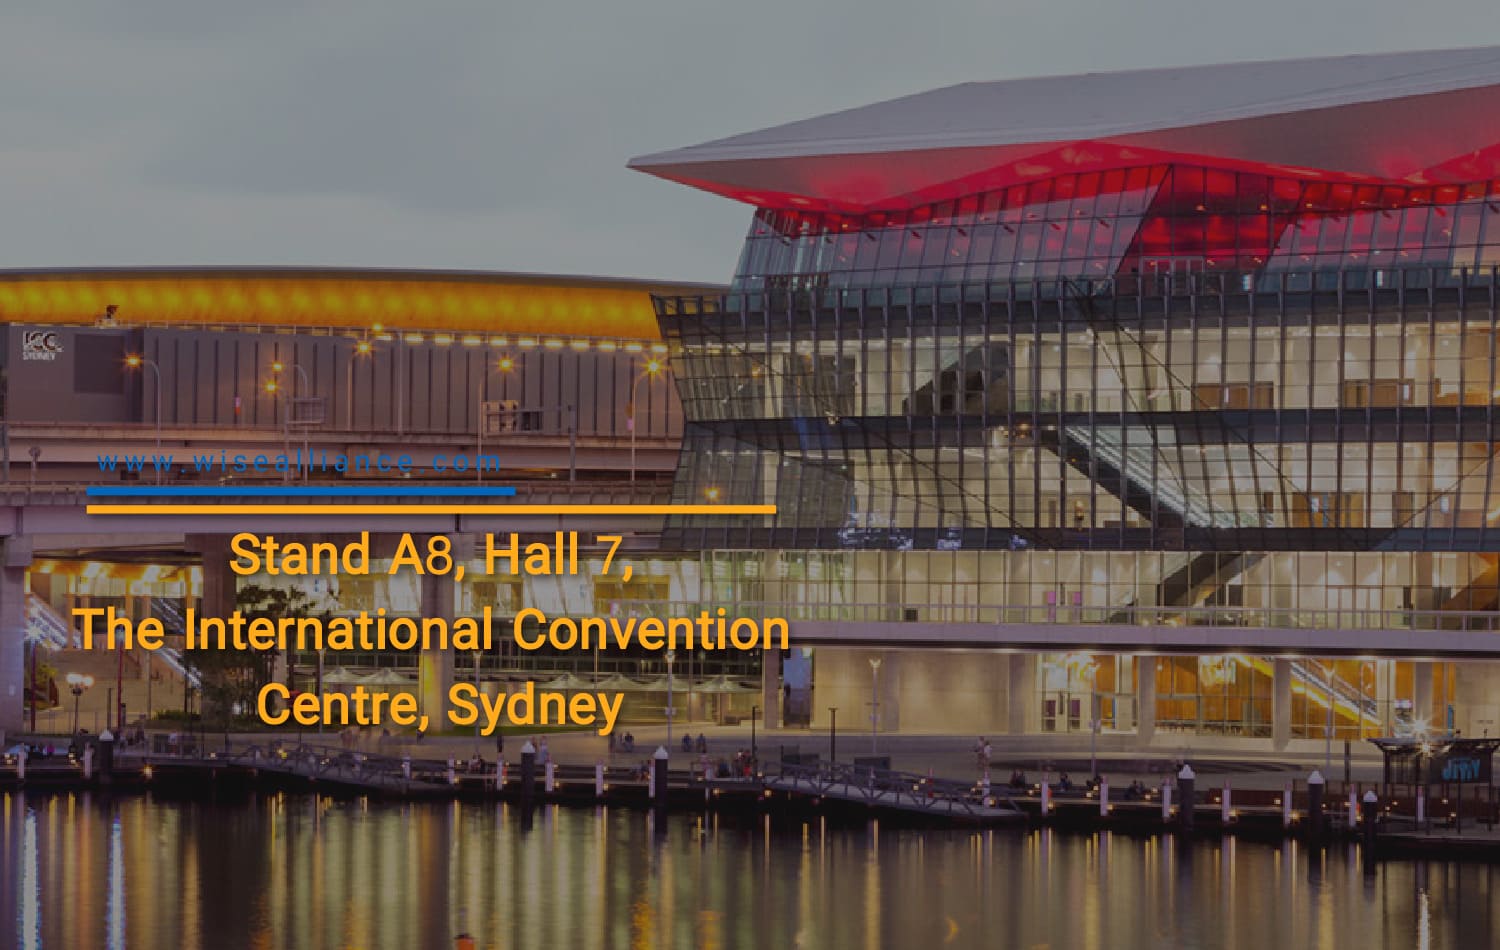 Stand A8, Hall 7, The International Convention Centre, Sydney